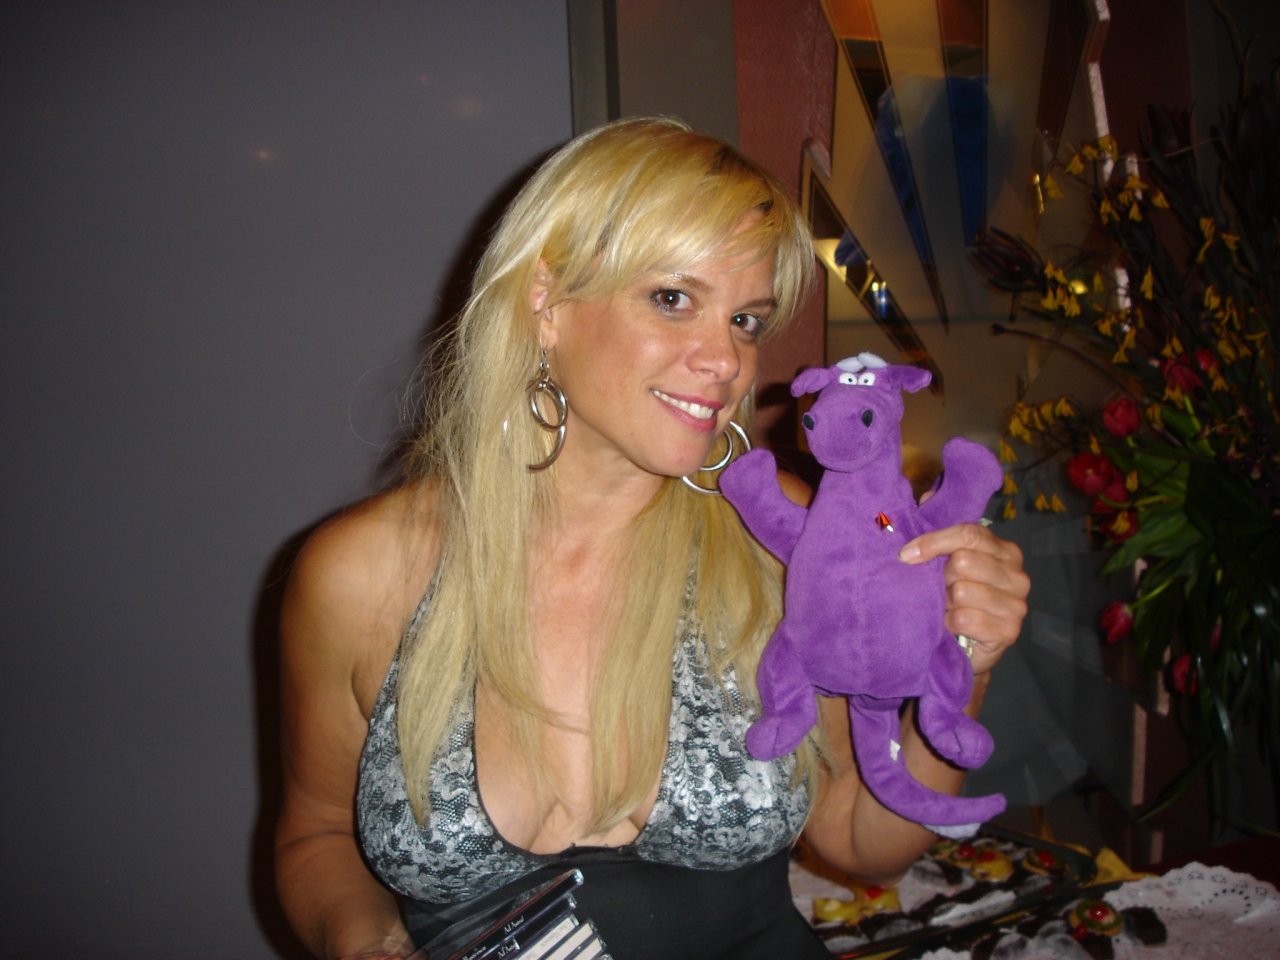 Chase Masterson leaked wallpapers